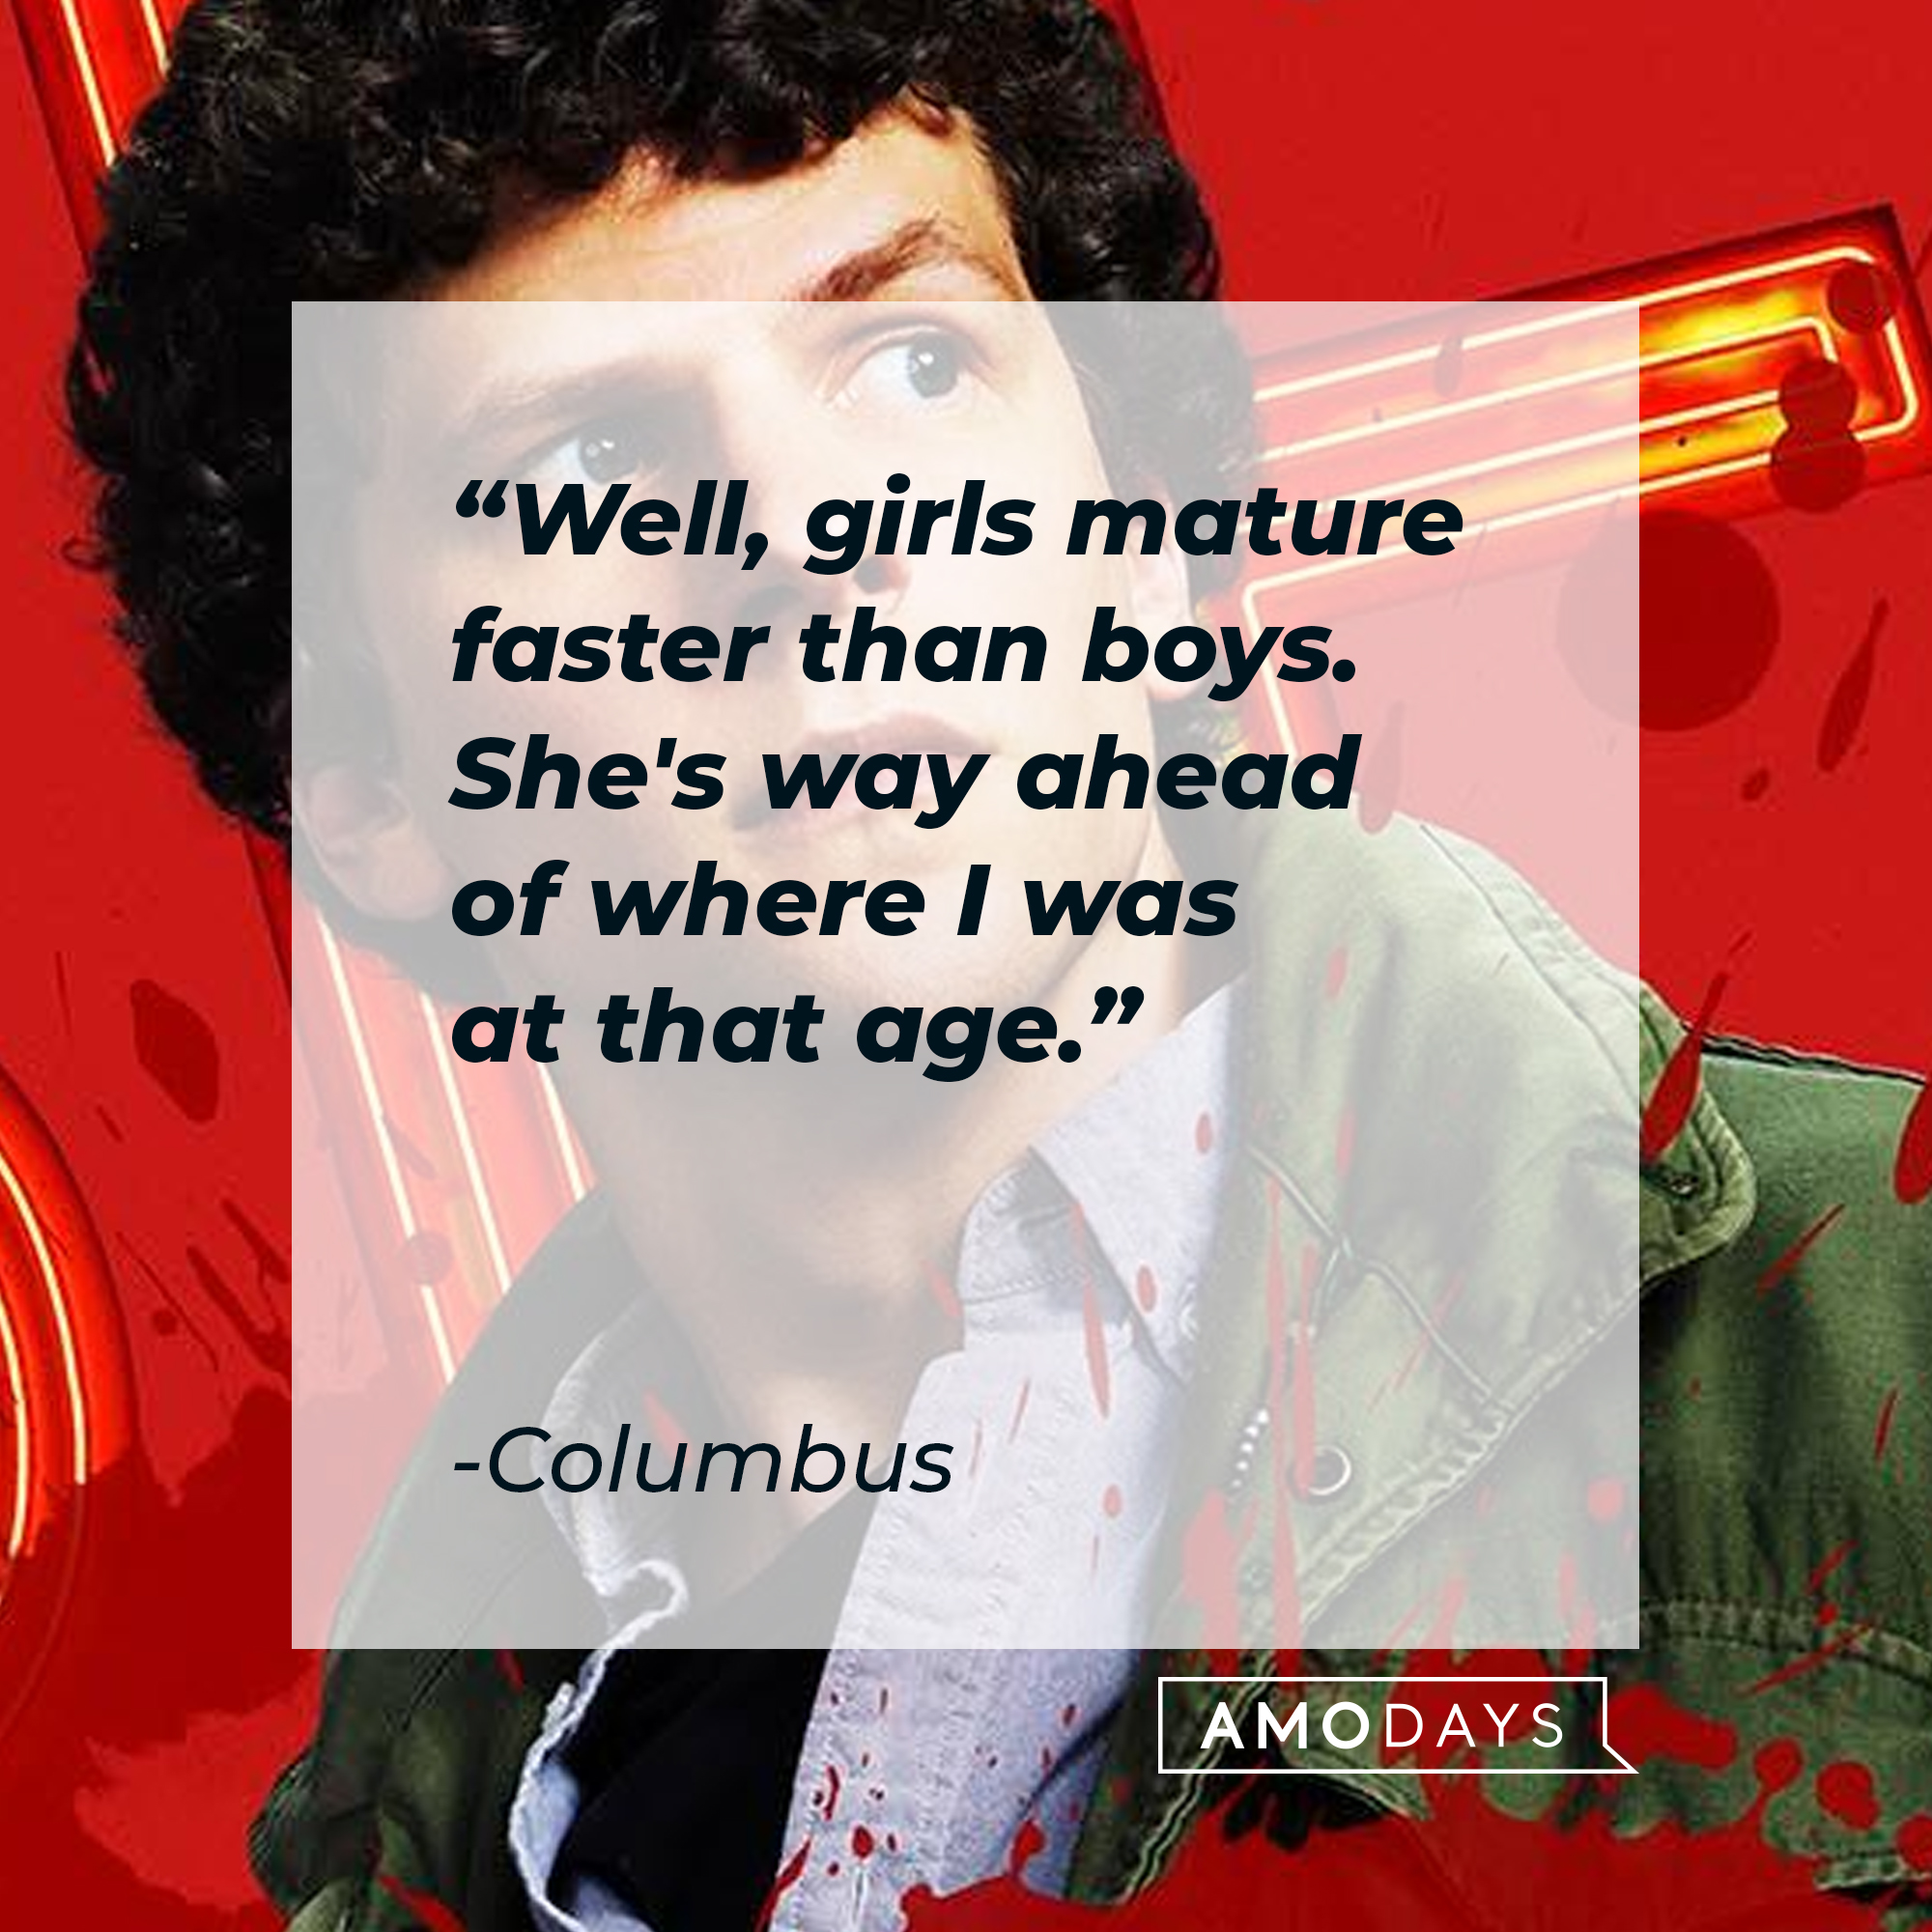 Columbus' quote: "Well, girls mature faster than boys. She's way ahead of where I was at that age." | Source: Facebook.com/Zombieland